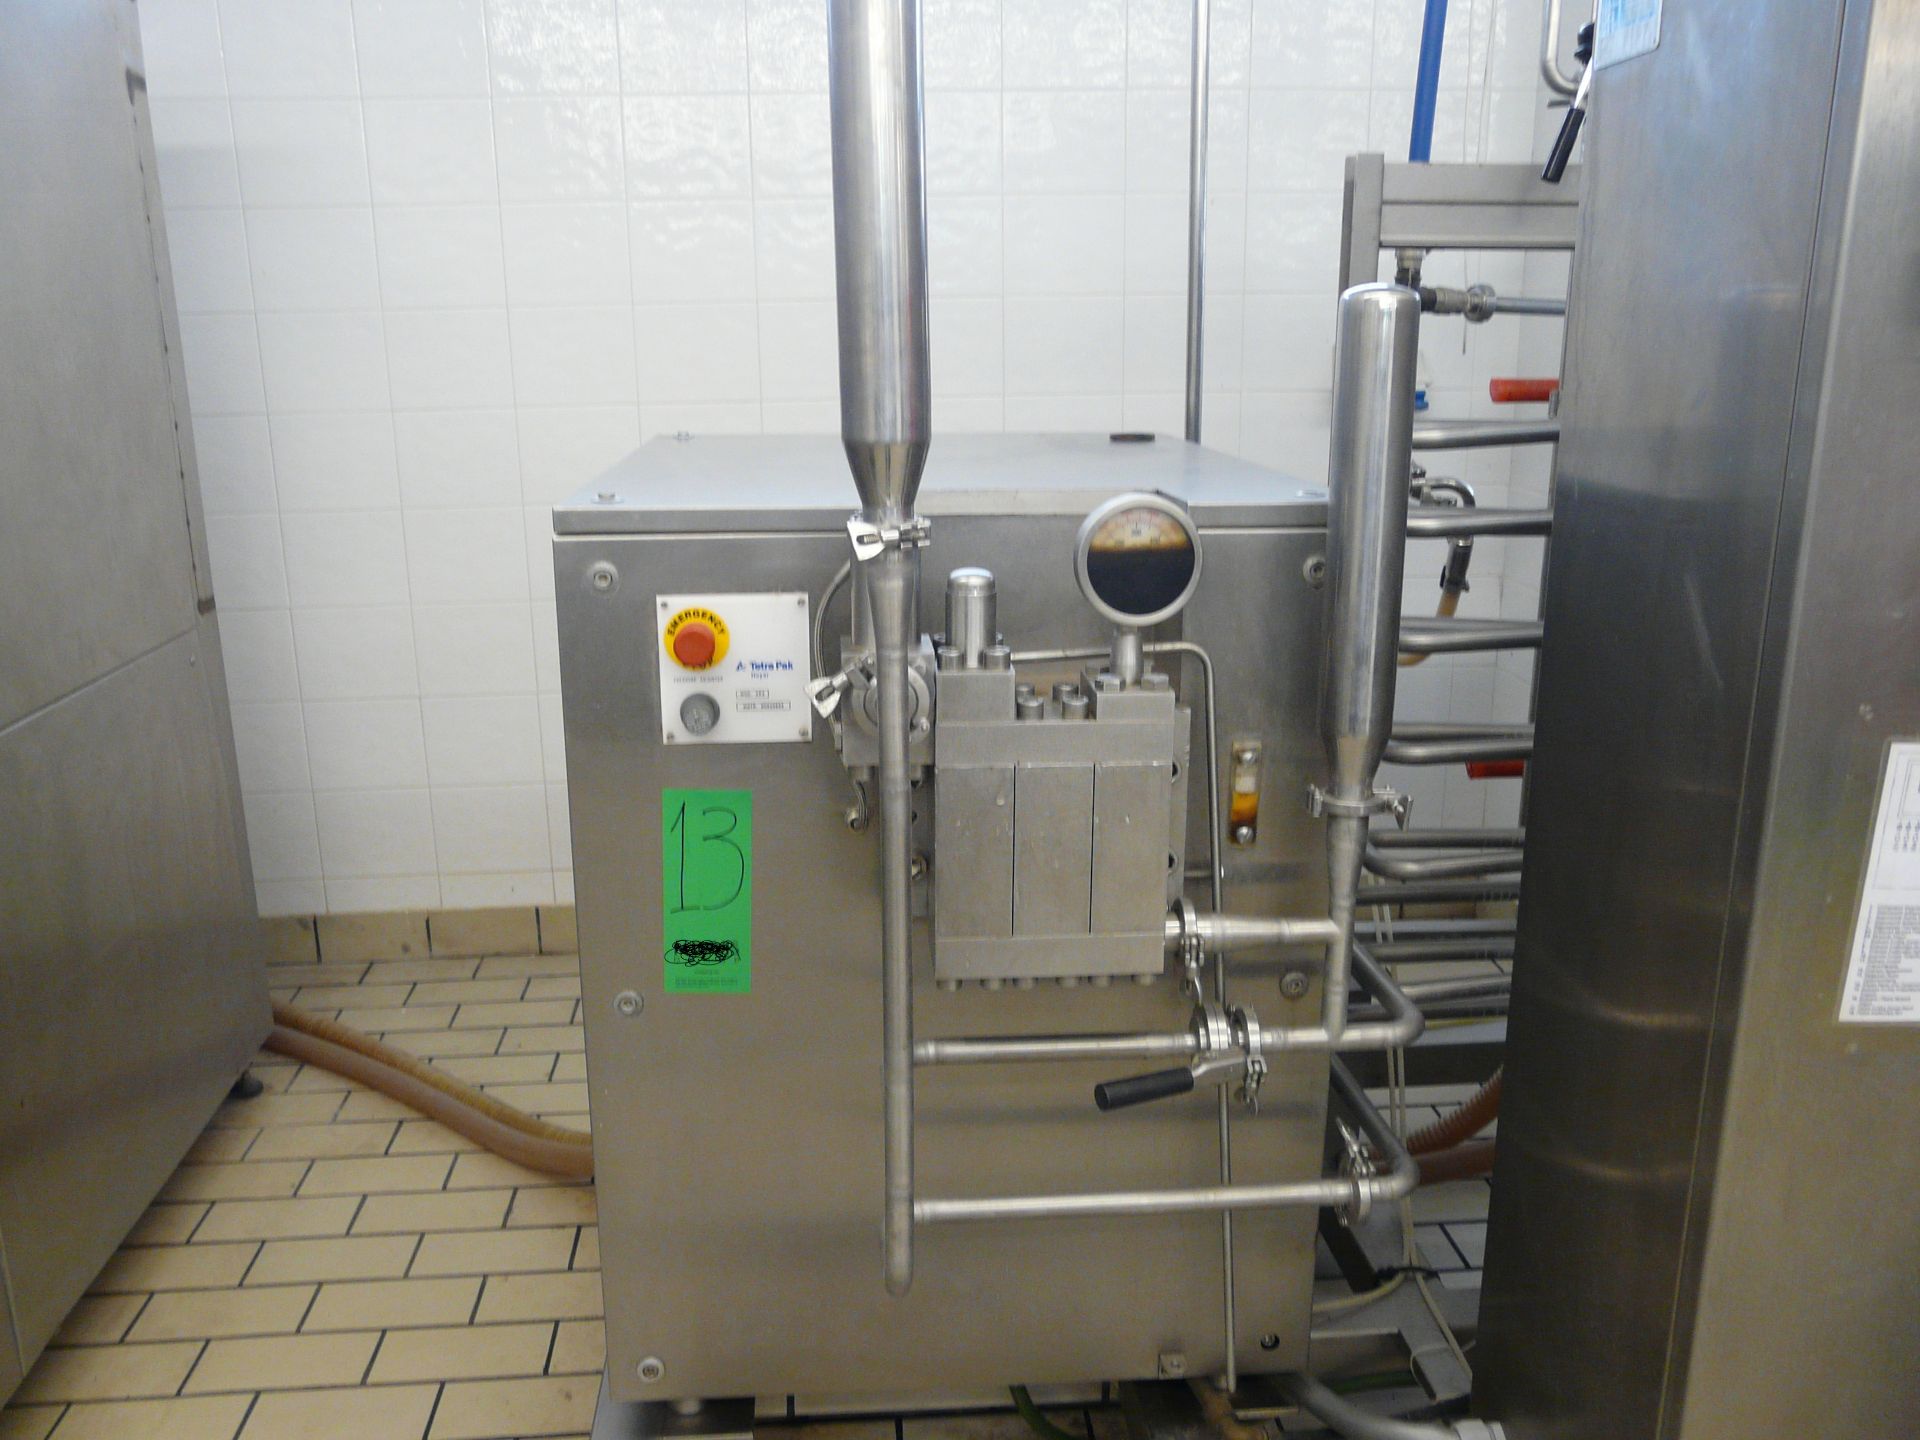 TETRA PAK HOYER HTST 1200 Pasteurizer for Ice Cream , Contains 2 x Tanks with agitators ,1 Plate - Image 5 of 20